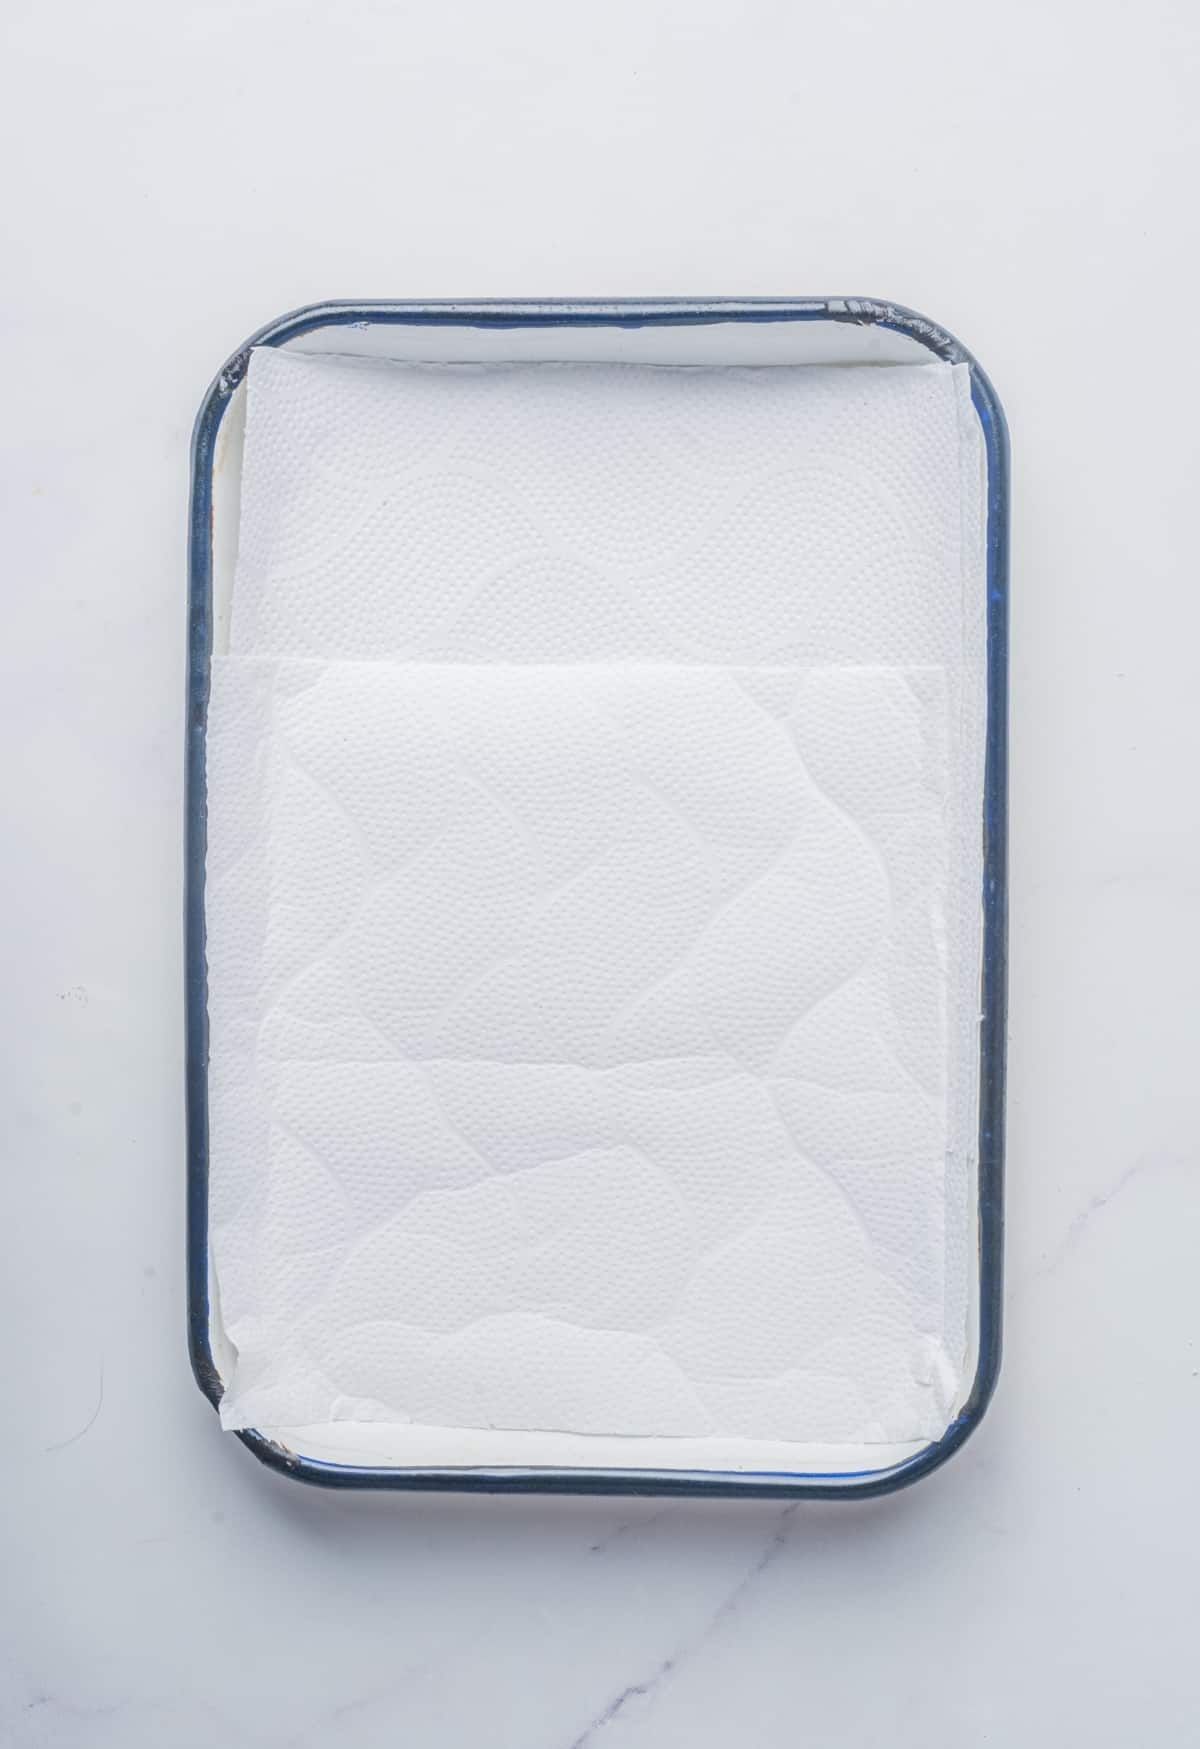 A baking dish lined with paper towels.